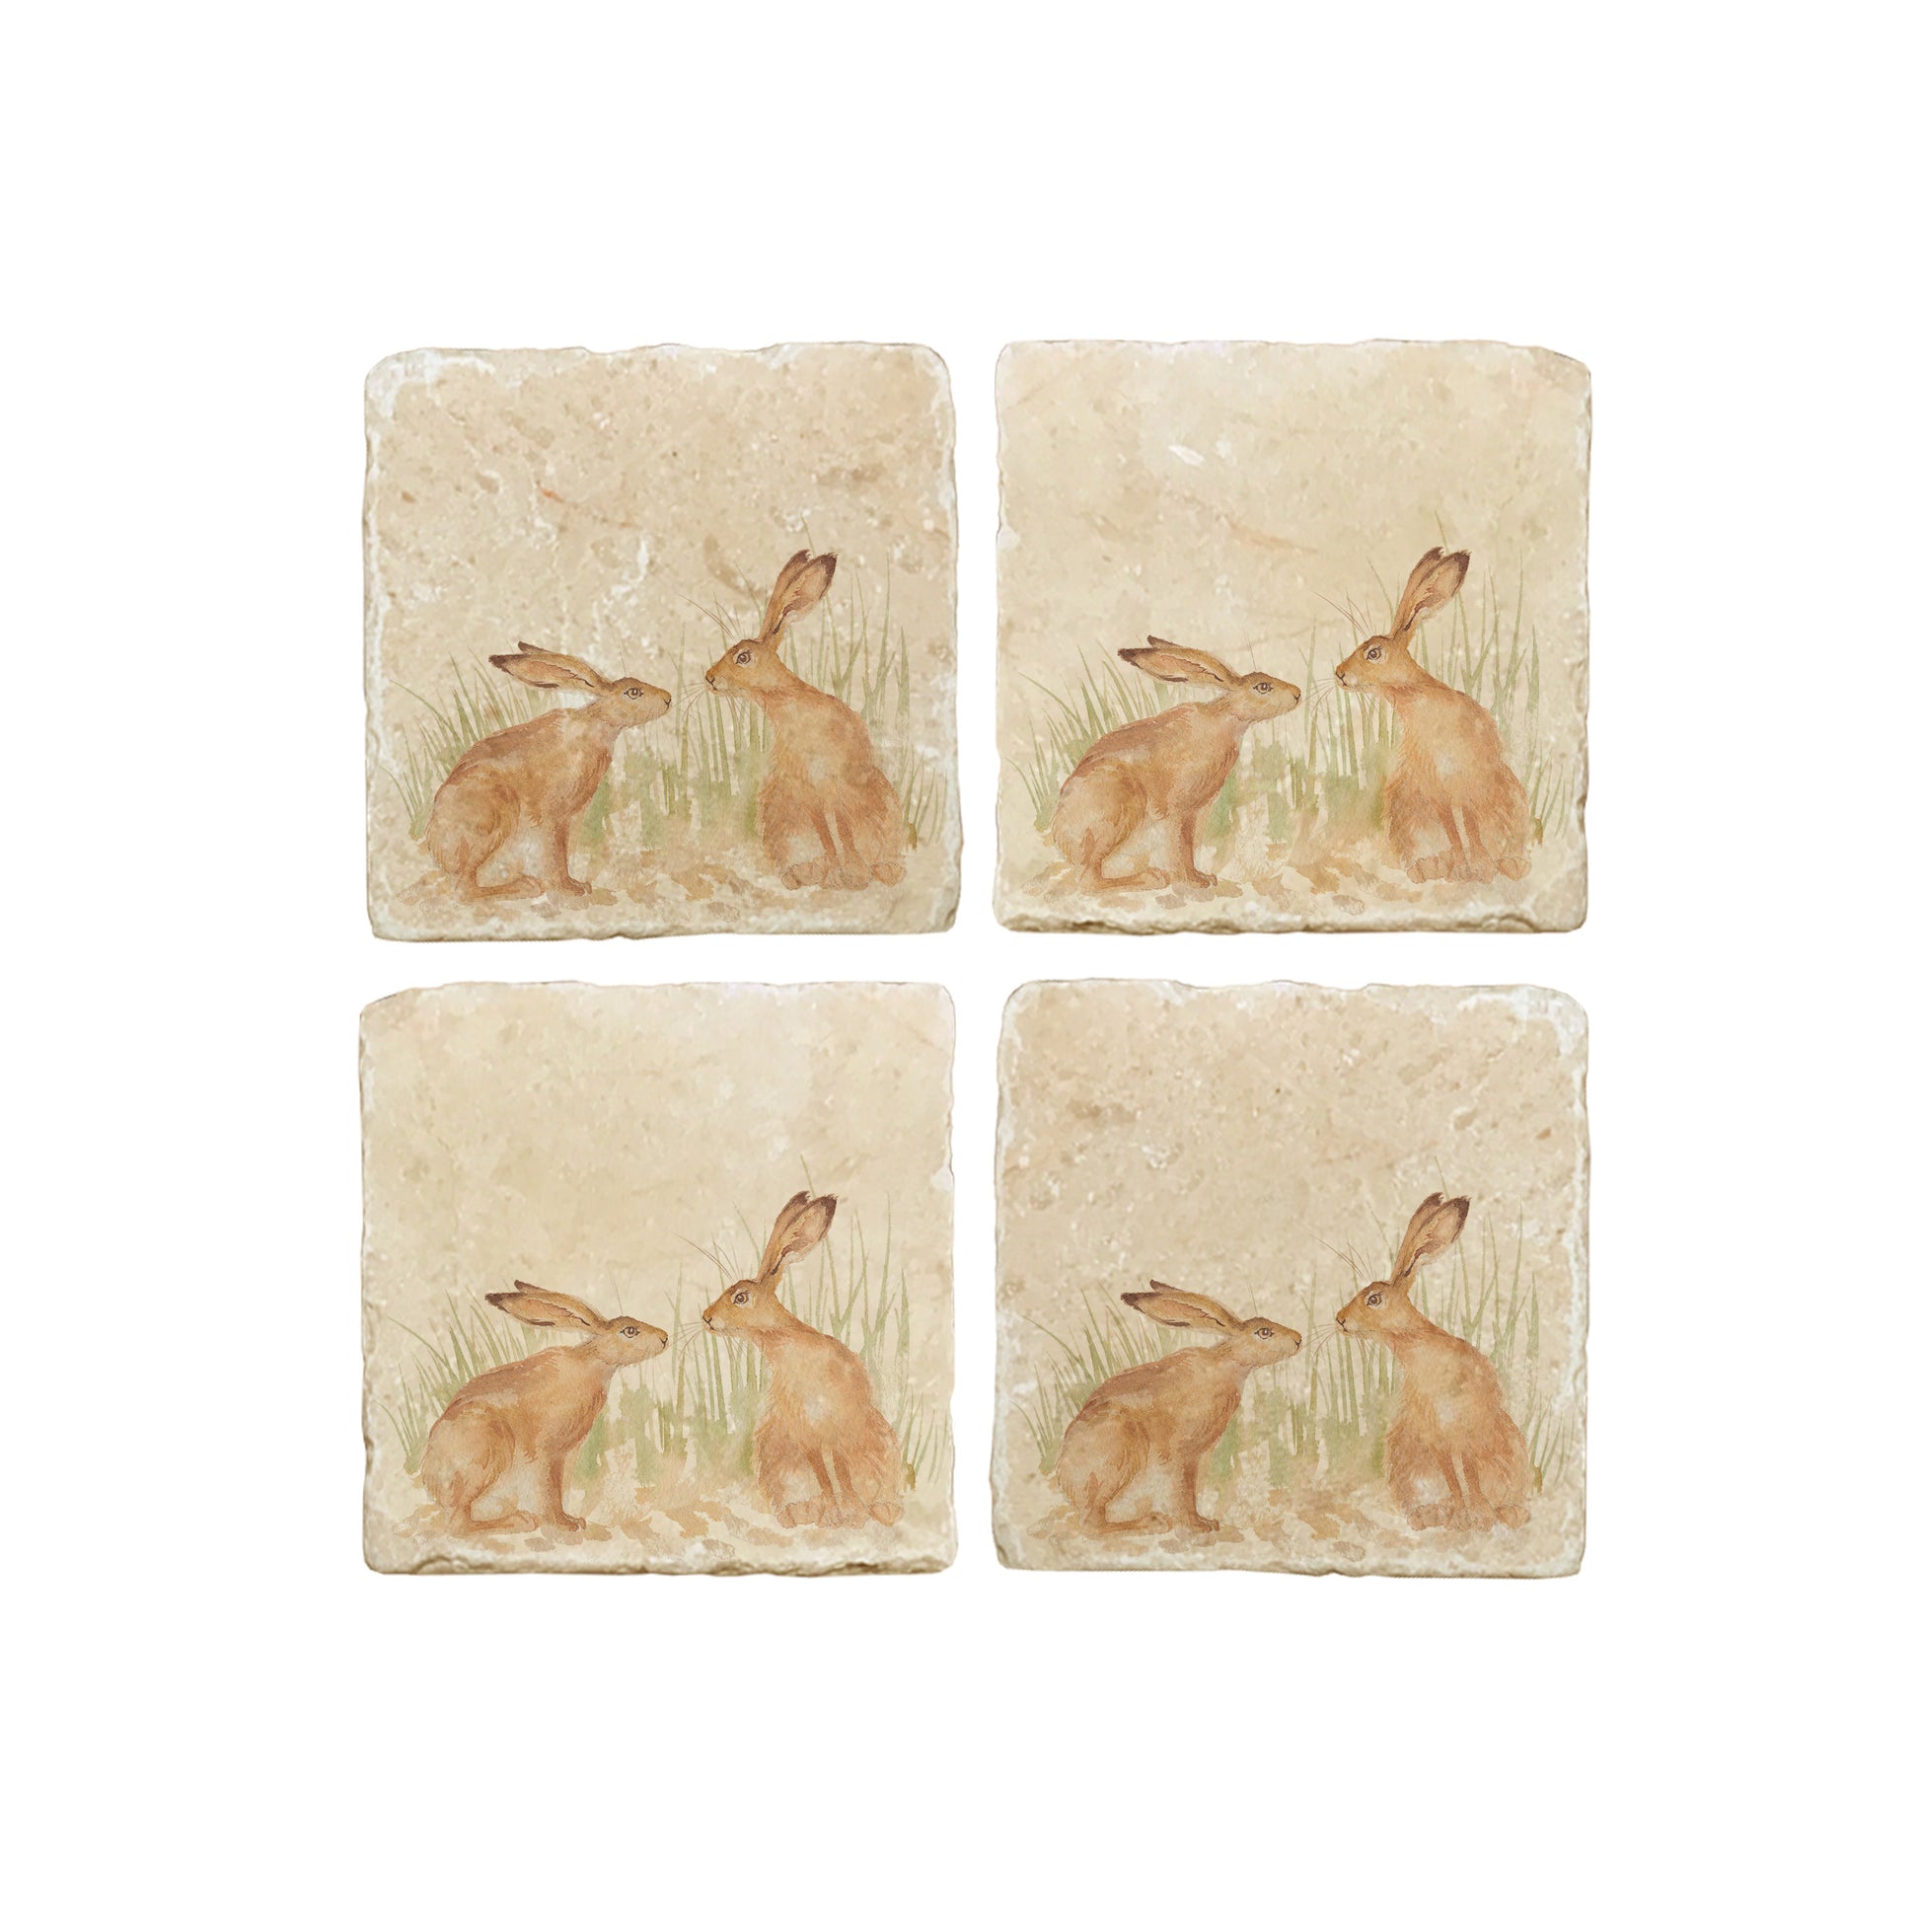 A set of 4 square marble coasters, featuring a watercolour design of two hares facing each other about to touch noses.